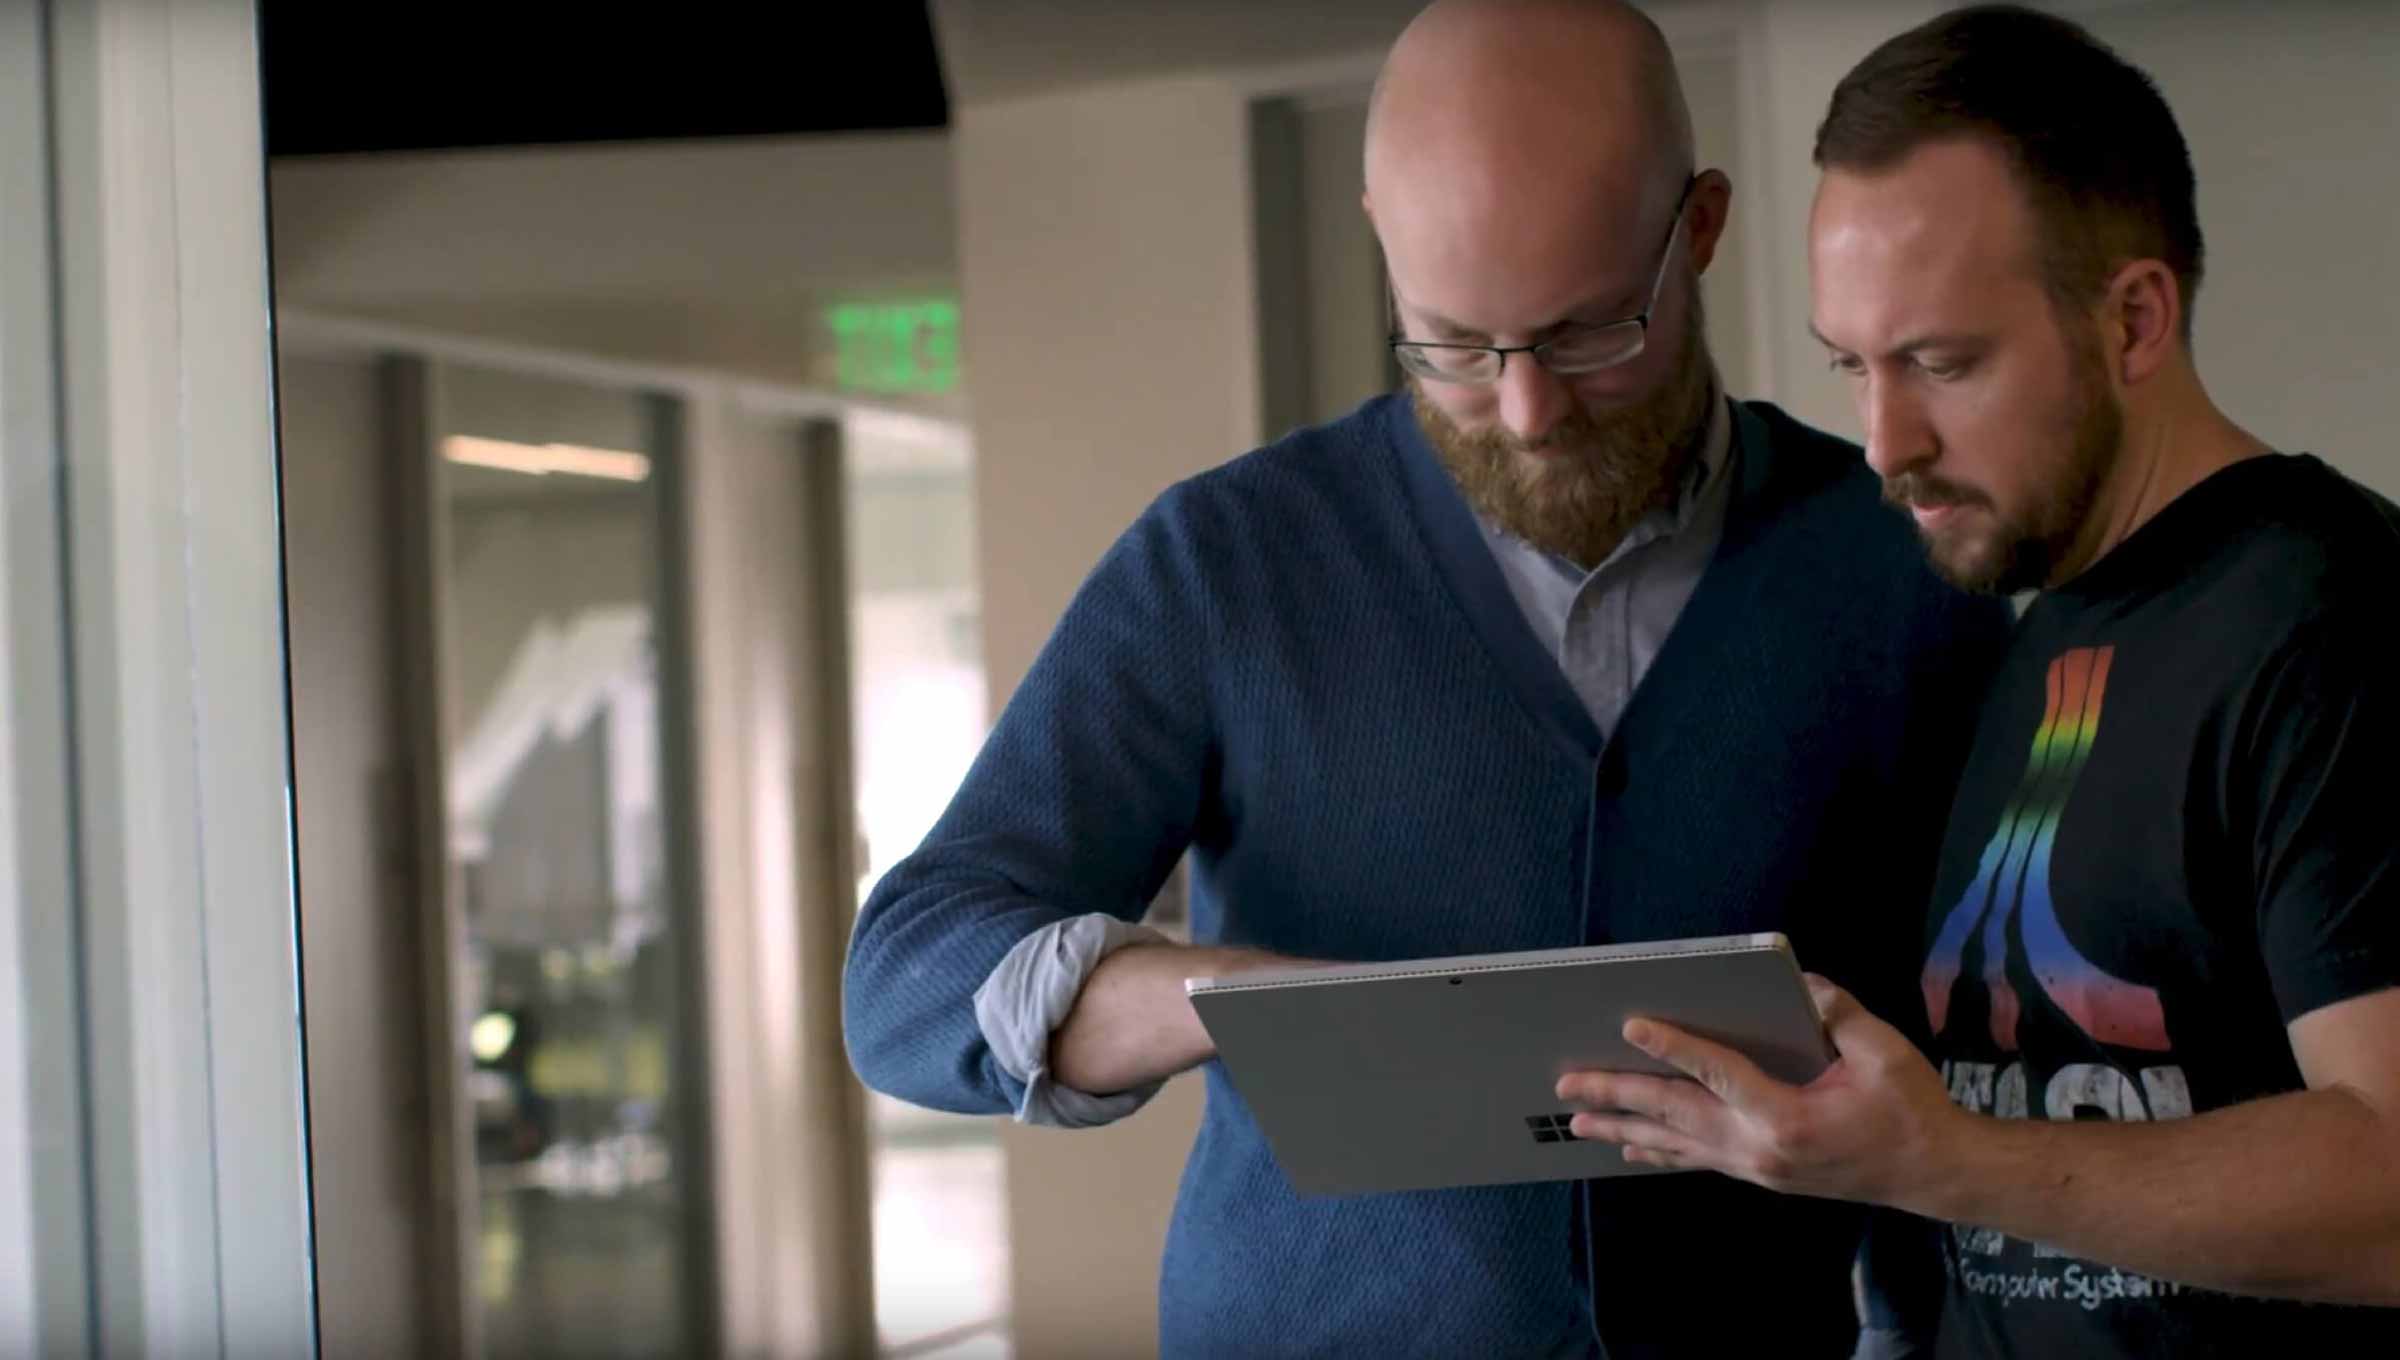 Two men looking at a Microsoft surface in an office hallway.